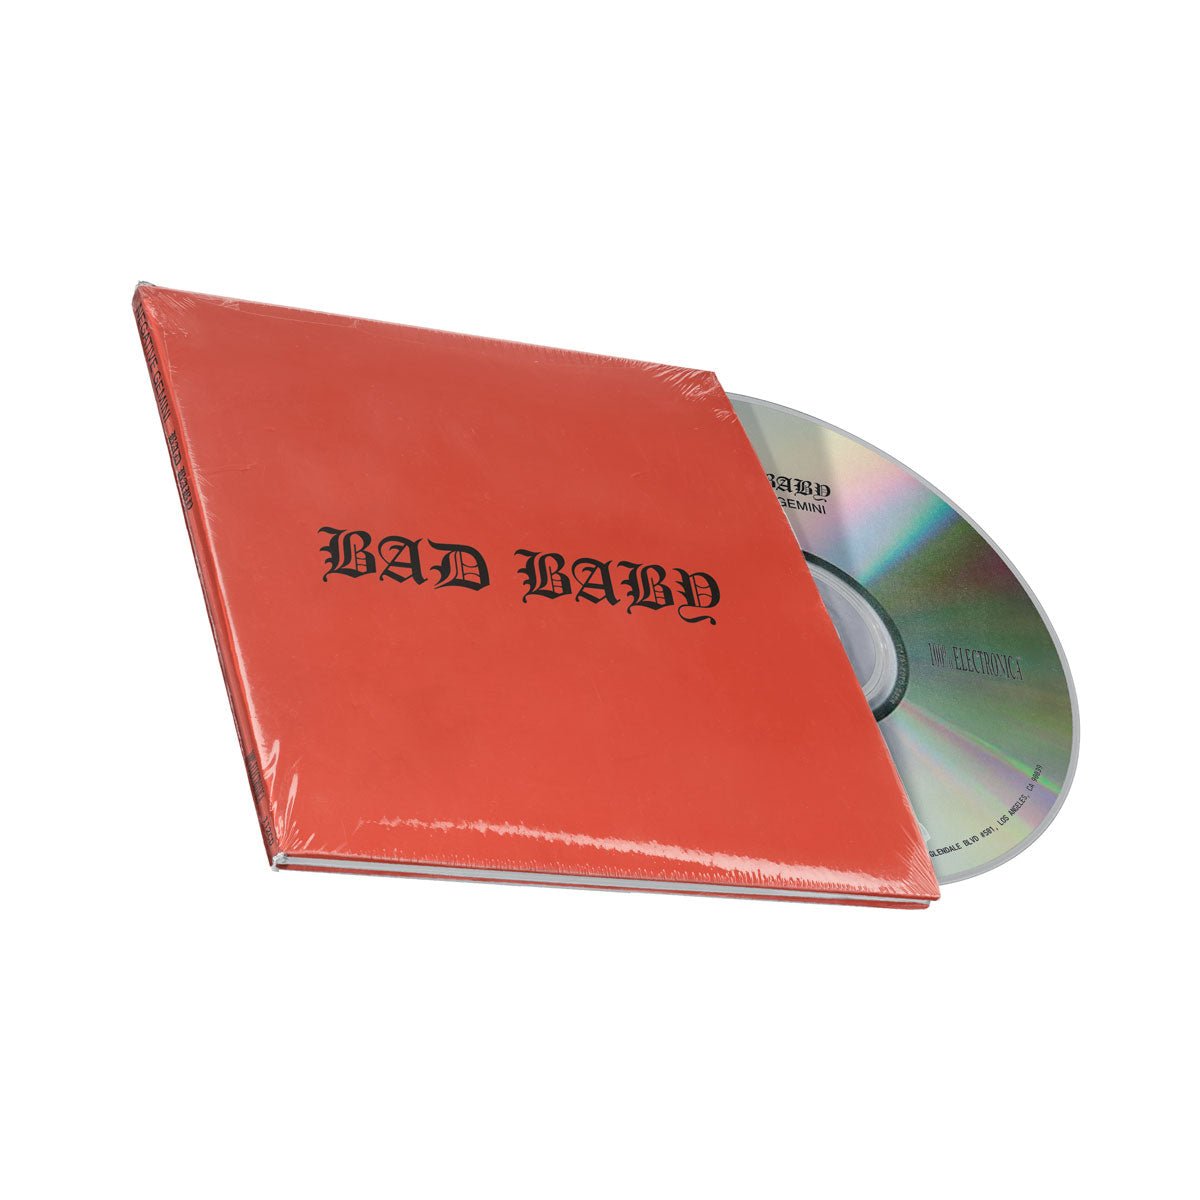 Neggy Gemmy - Bad Baby CD - 100% Electronica Official Store (Photo 1)